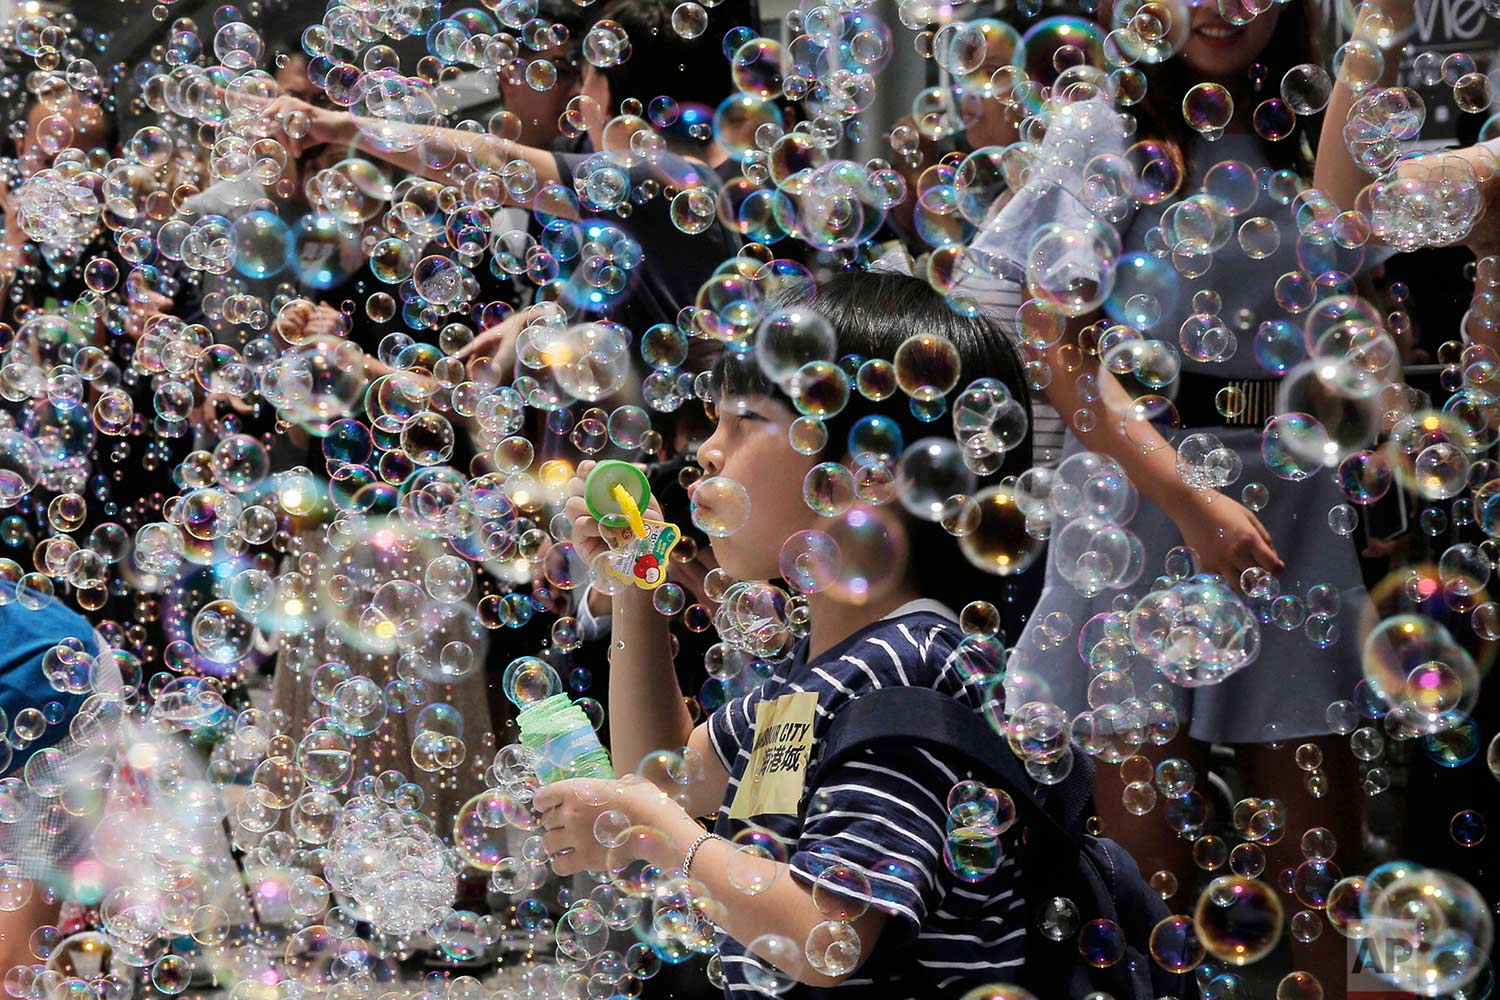  A boy plays with bubbles during an art display titled "Bubble Up" created by Japanese artist Shinji Ohmaki in Hong Kong, Wednesday, Aug. 2, 2017. (AP Photo/Kin Cheung) 